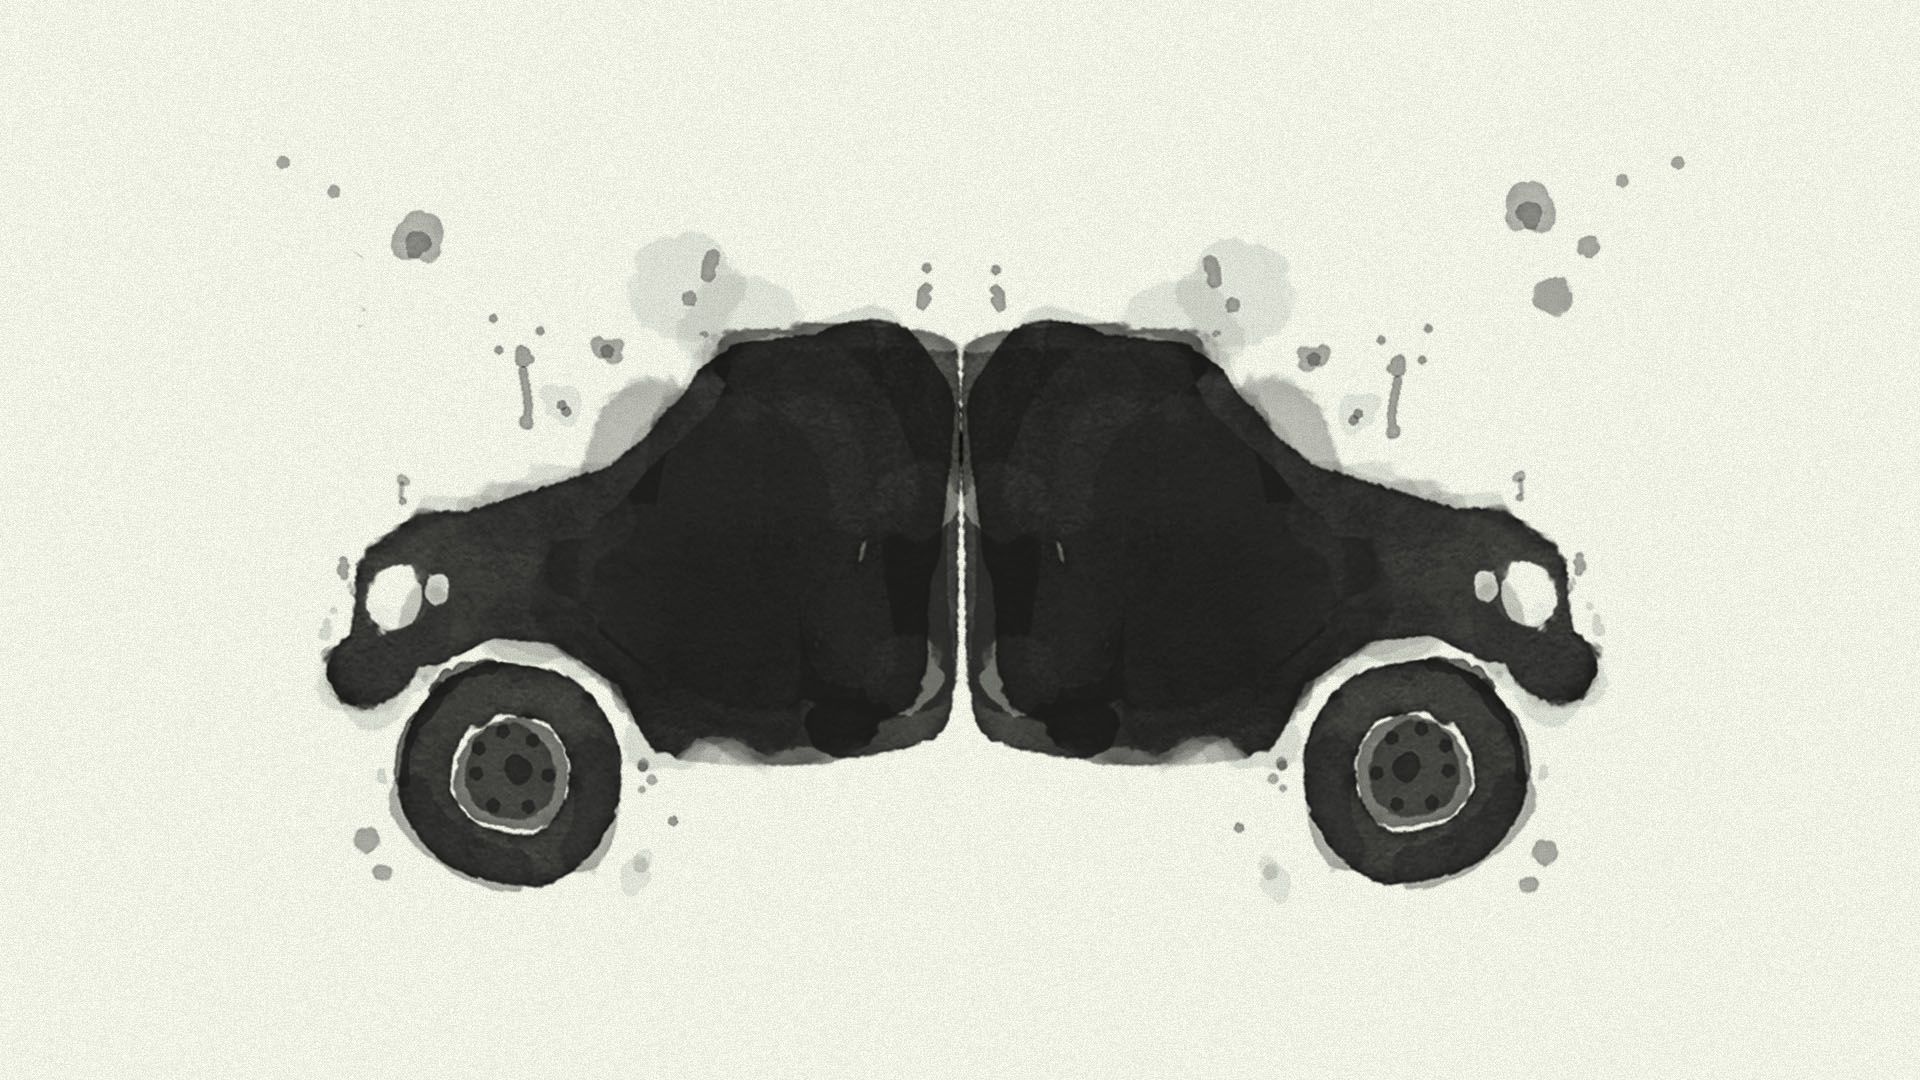 Illustration of a Rorschach test in the shape of a car